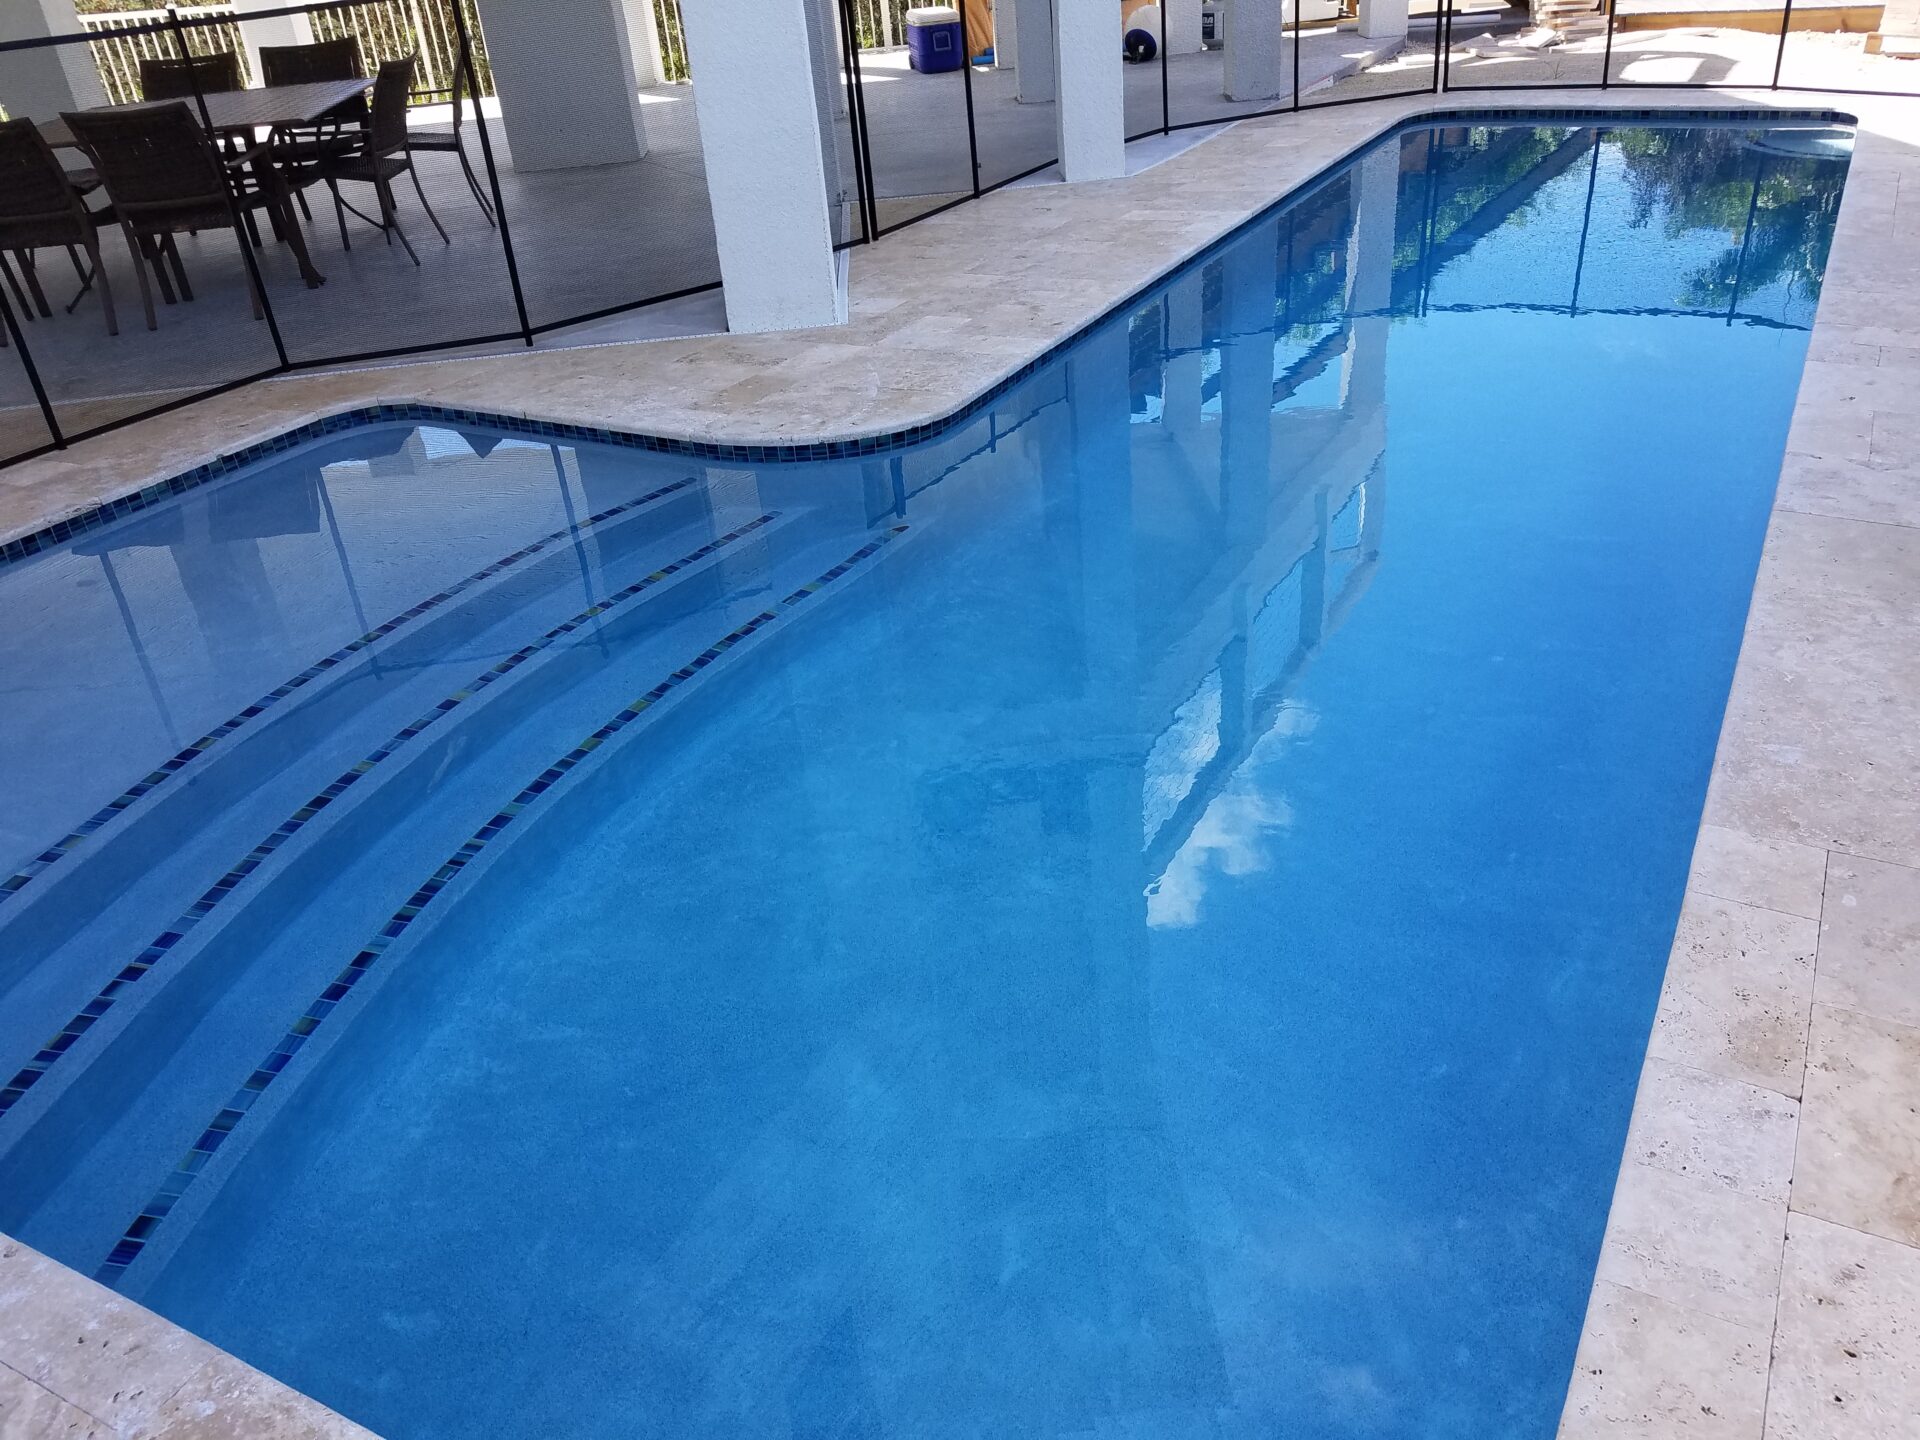 Pool Construction Services